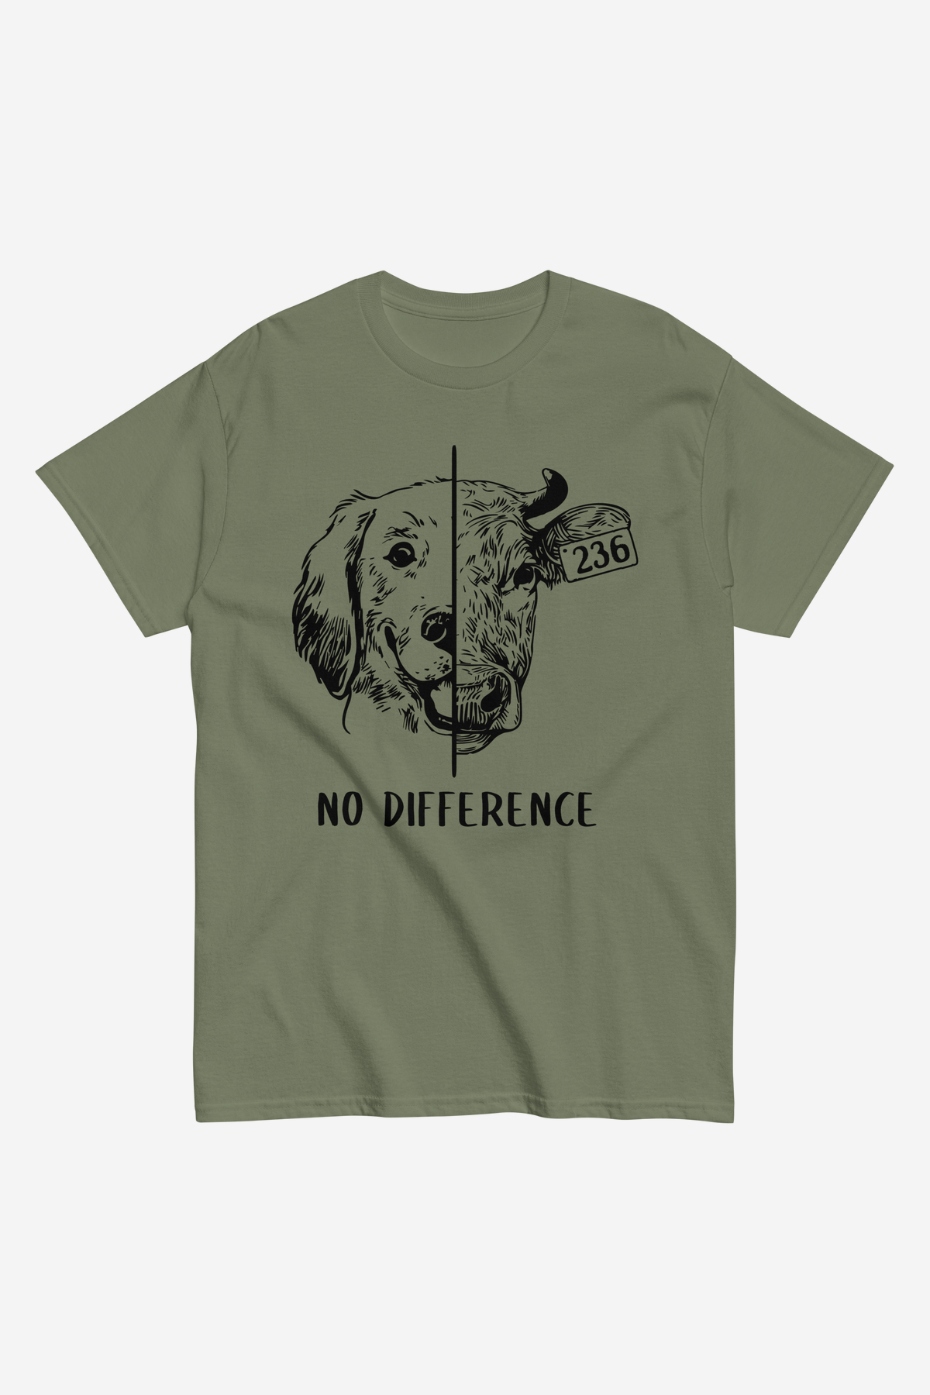 No Difference Men's classic tee